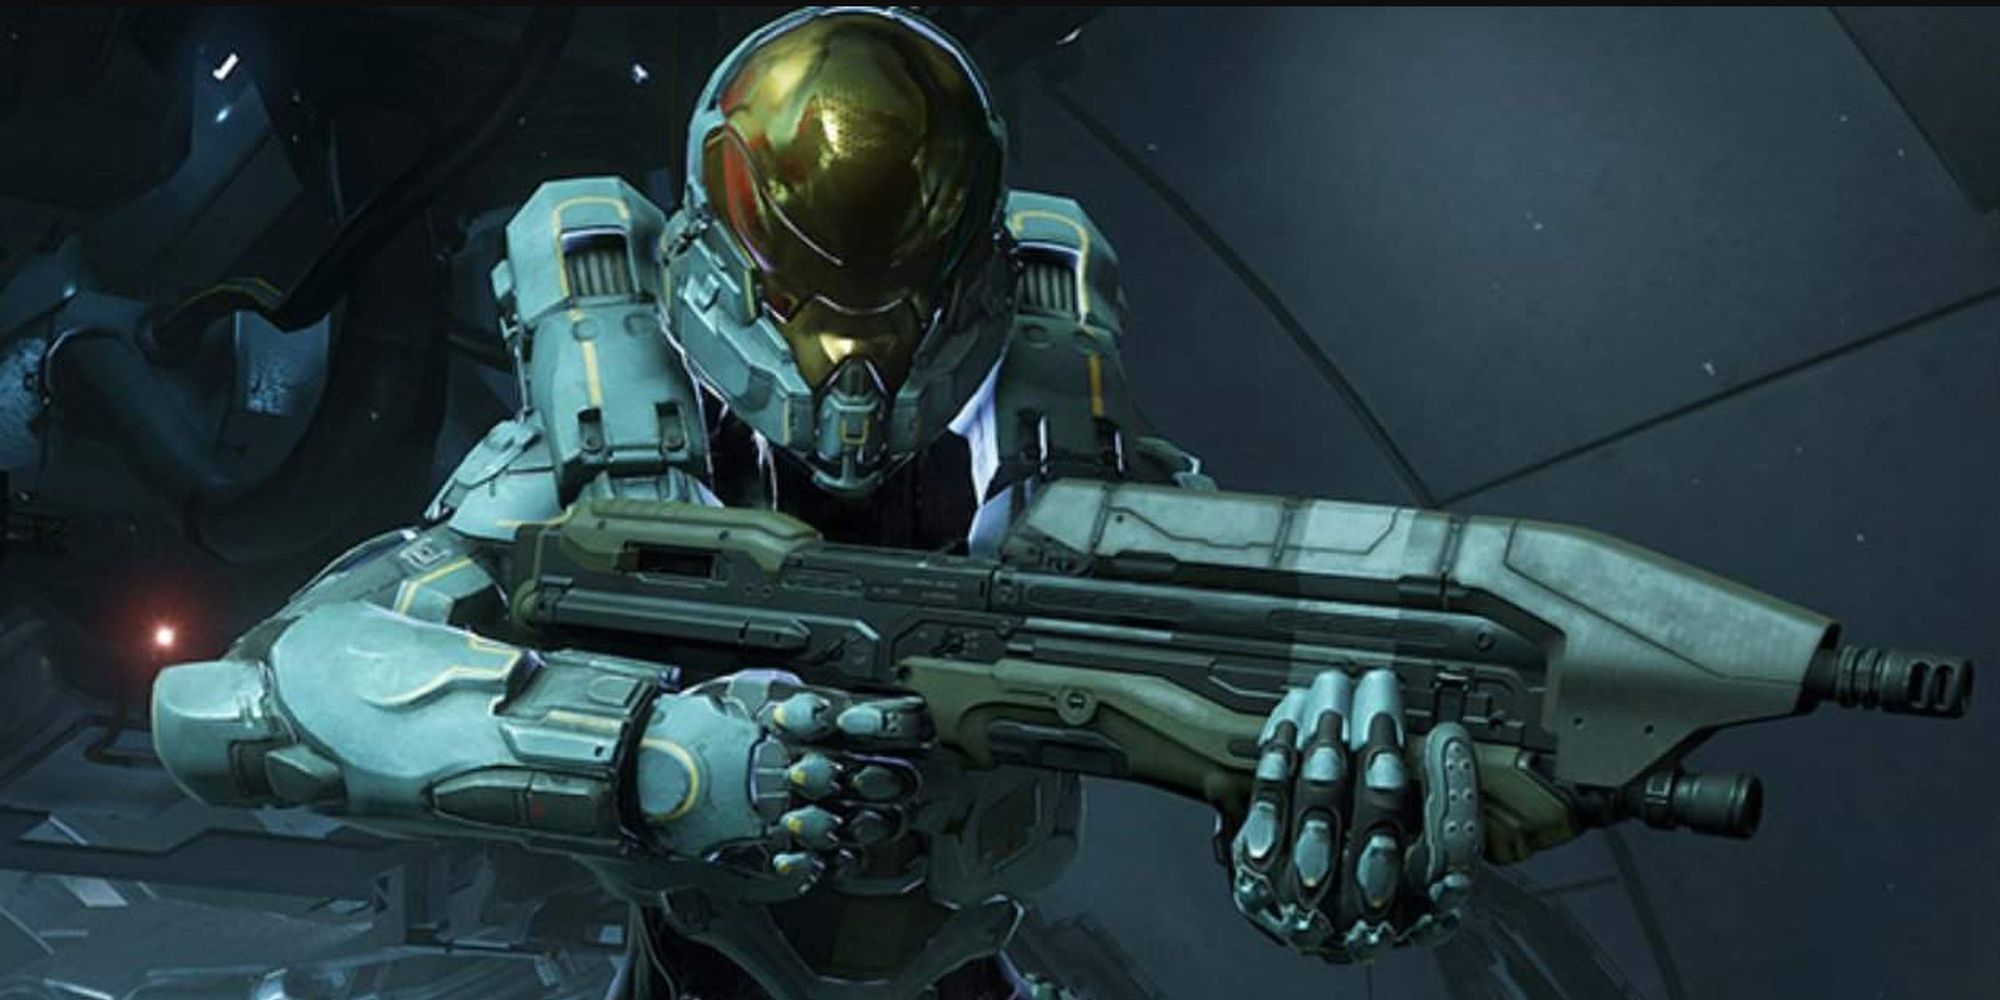 Halo: Spartan Kelly In Profile Holding An Assault Rifle